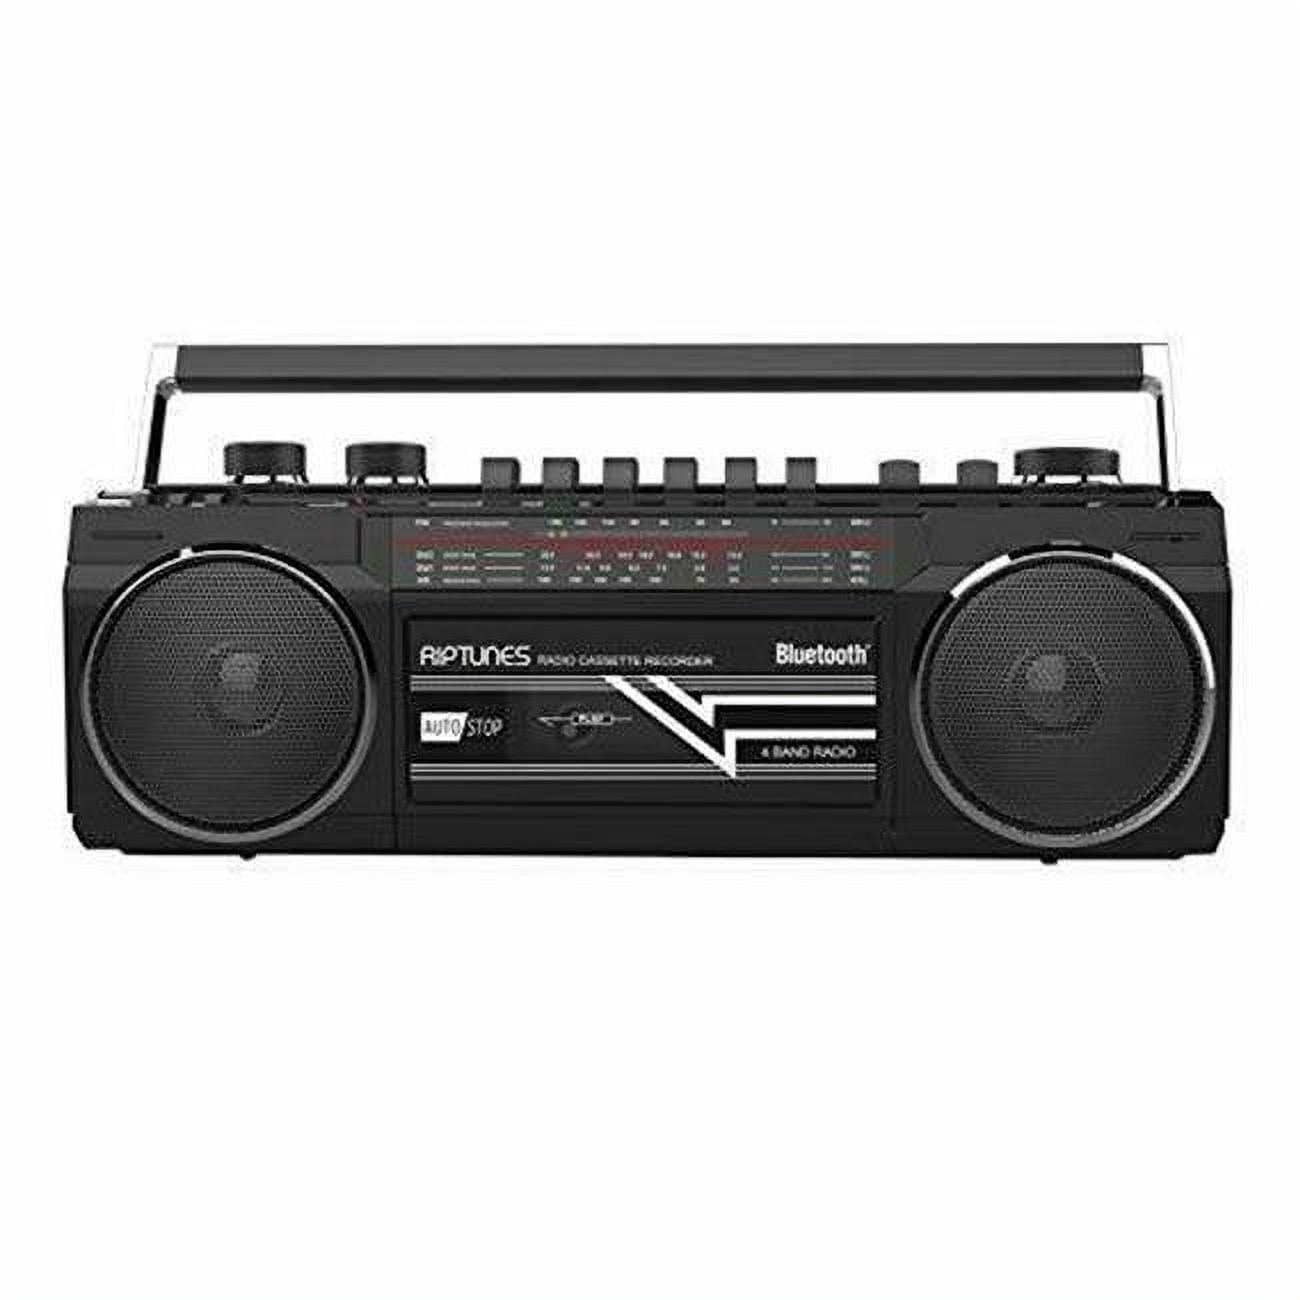 RIPTUNES Portable CD Player Bluetooth Stereo Sound System Digital AM FM  Radio, MP3 CD Boombox USB SD PALYBACK with Enhanced Bass, Aux in, Headphone  Ja